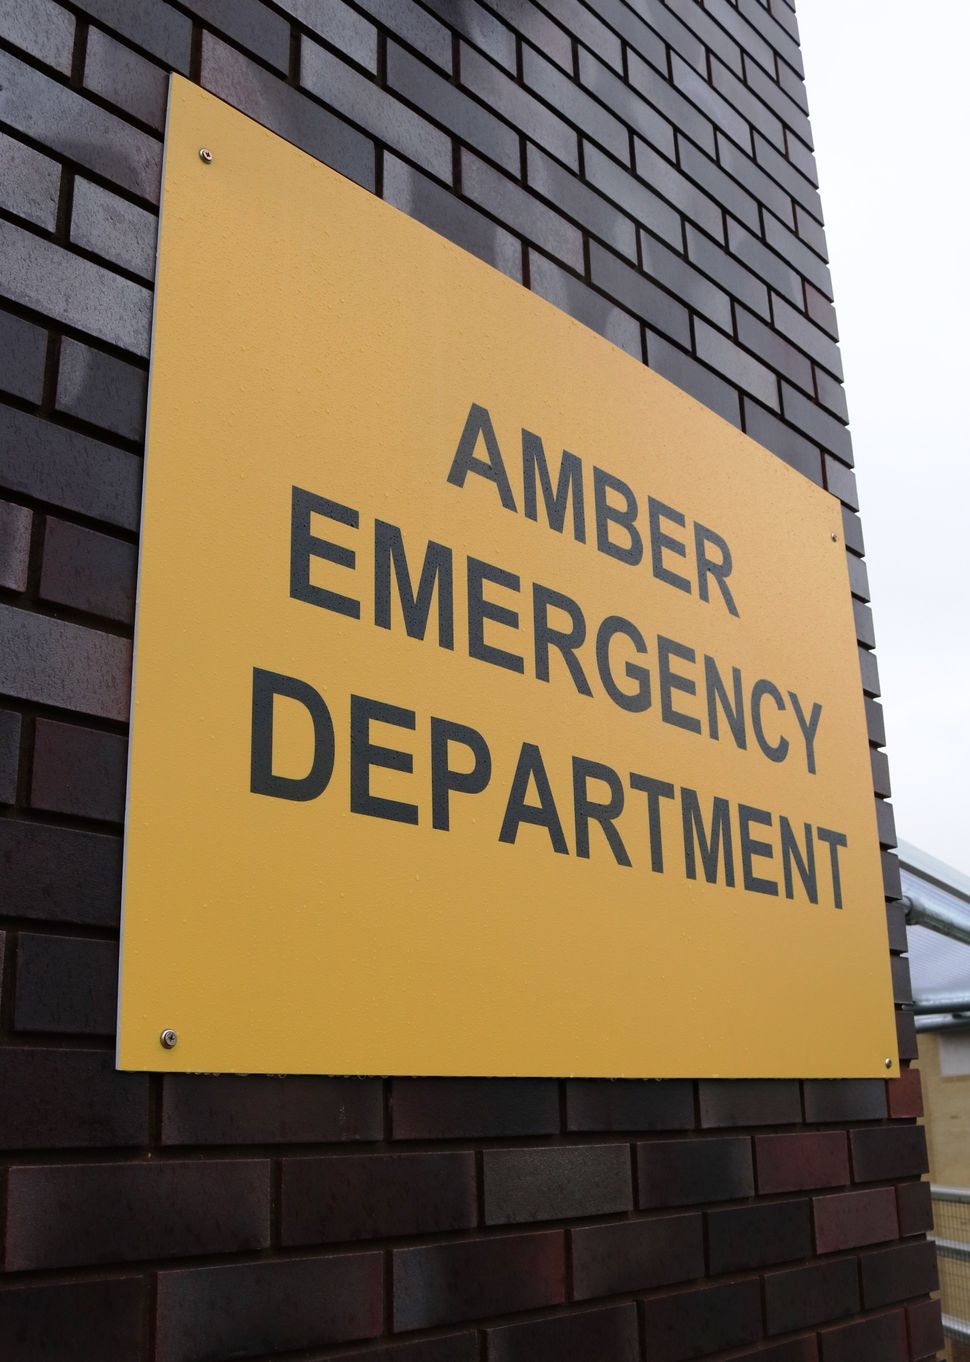 The hospital's A&E department has effectively been split into two. Patients without Covid symptoms are sent to the 'amber emergency department'. 